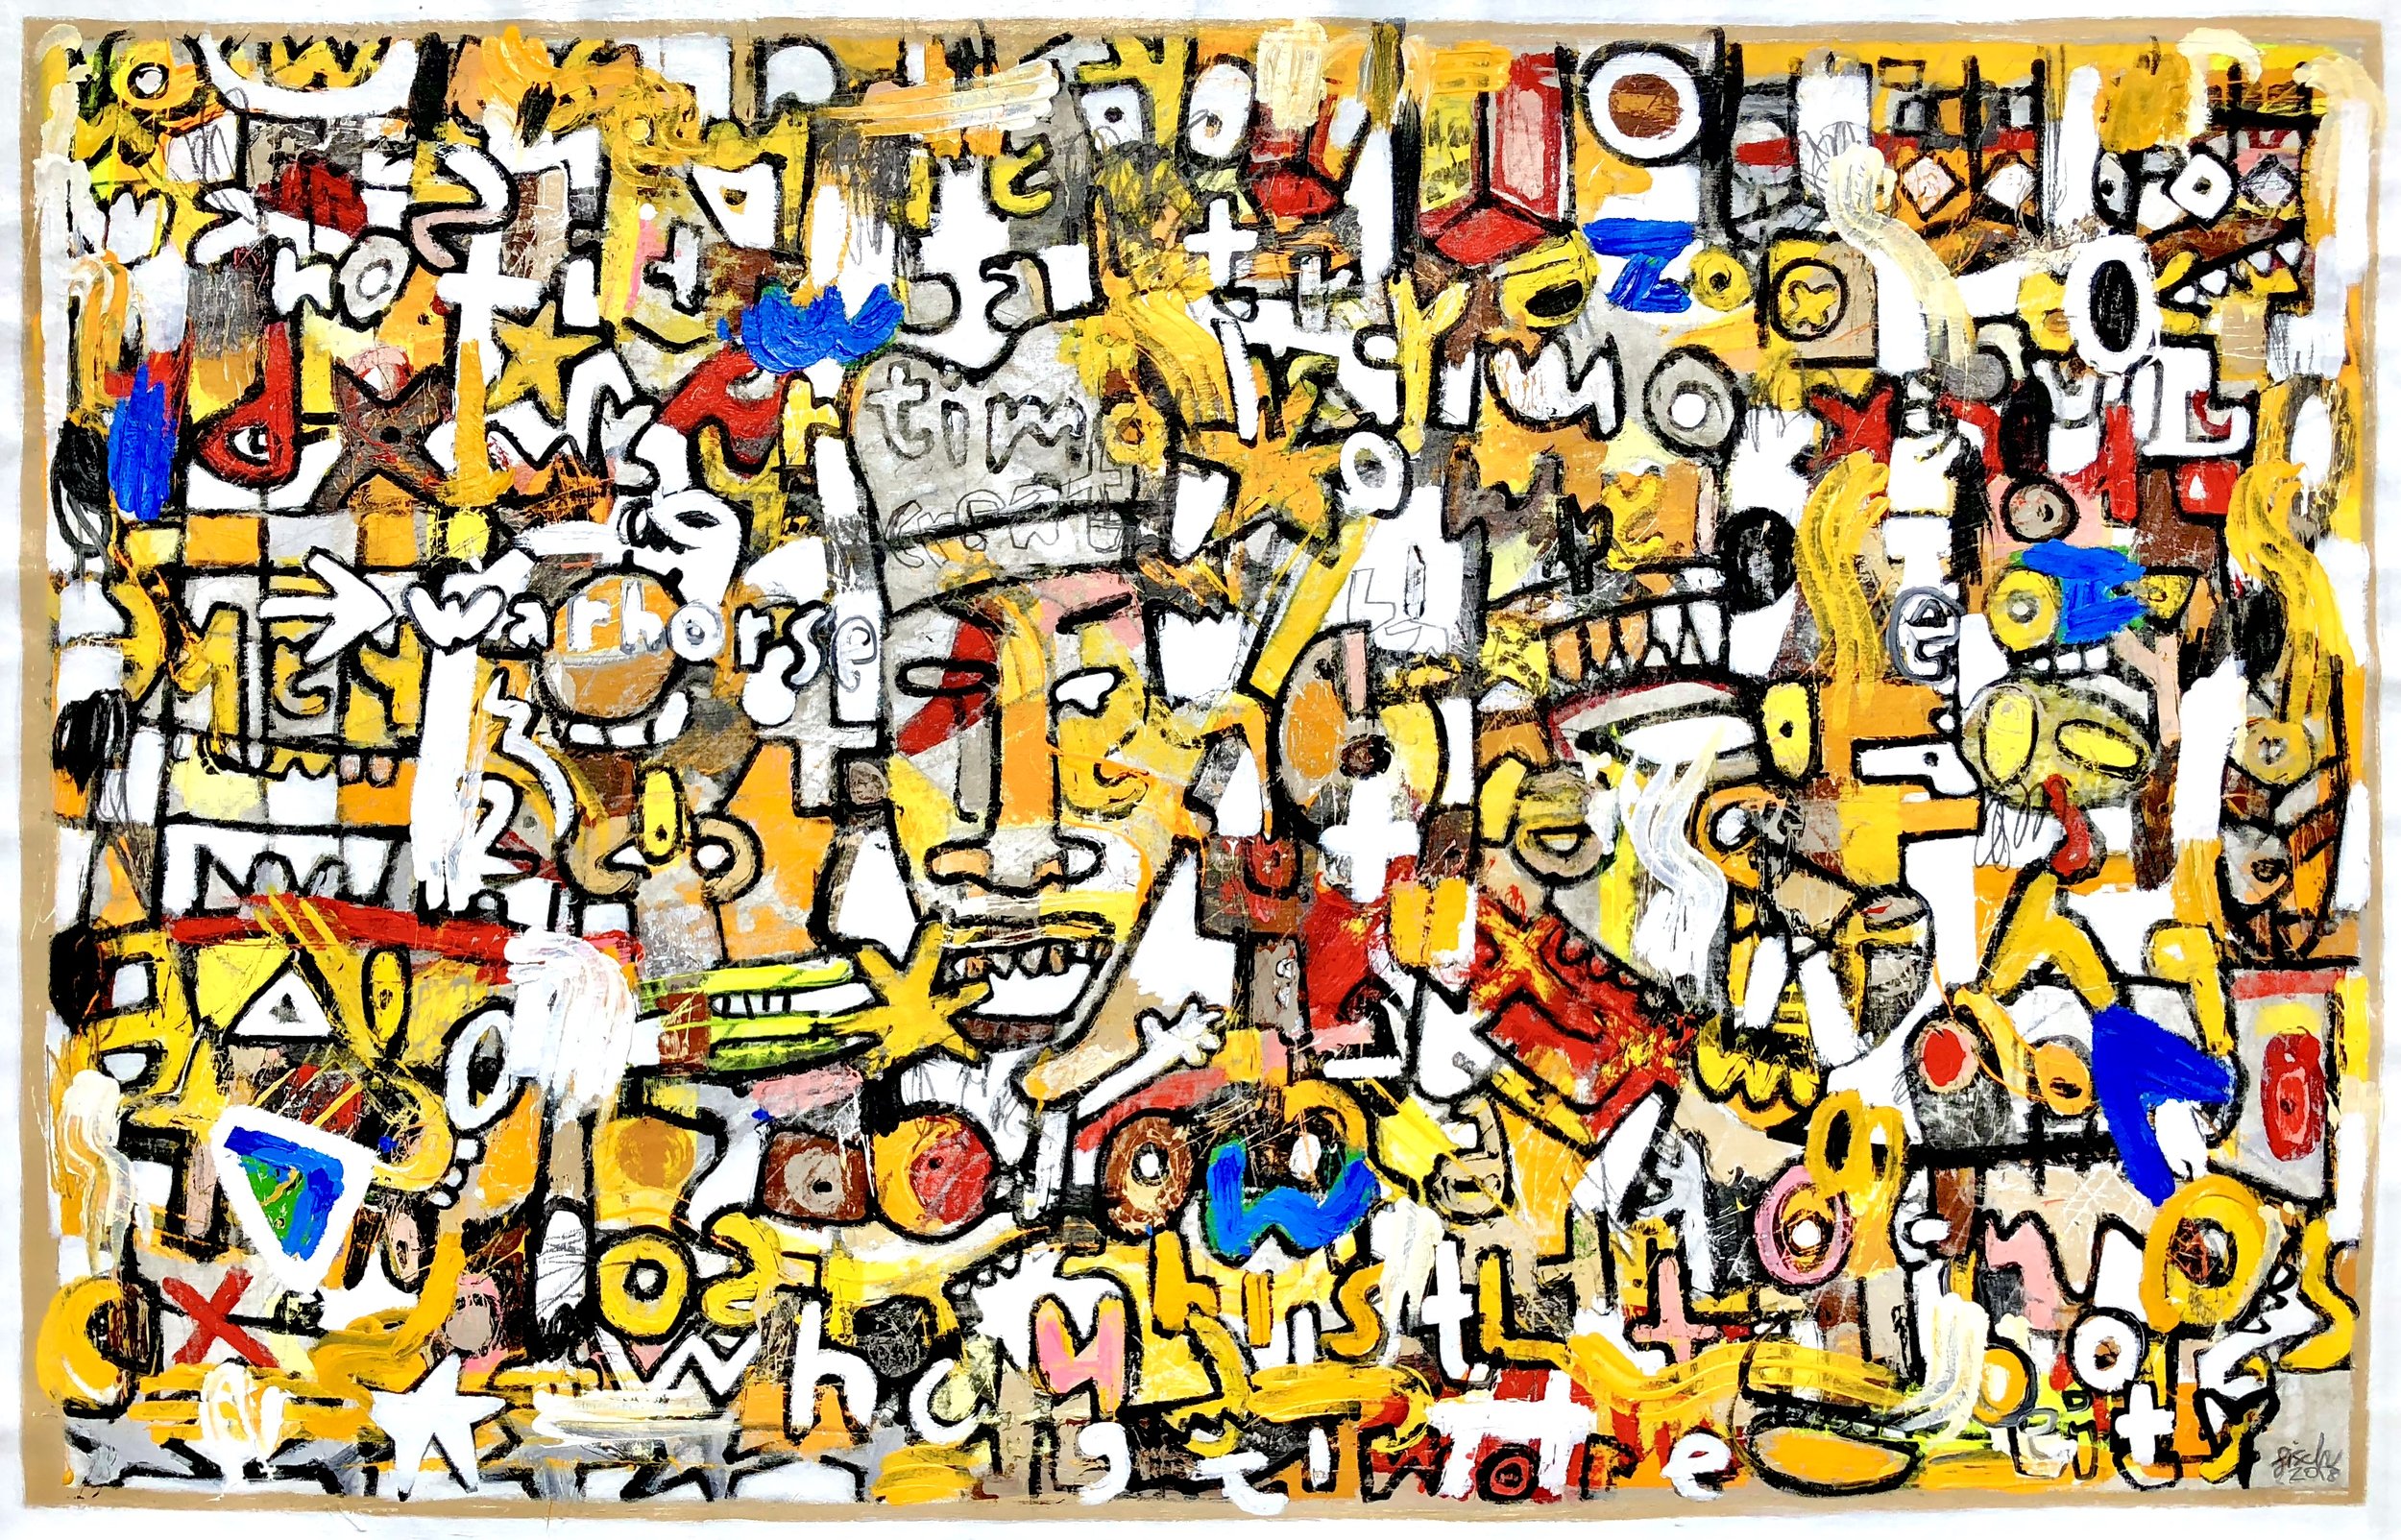 Mammon & The Battle of Greed, 50x78"